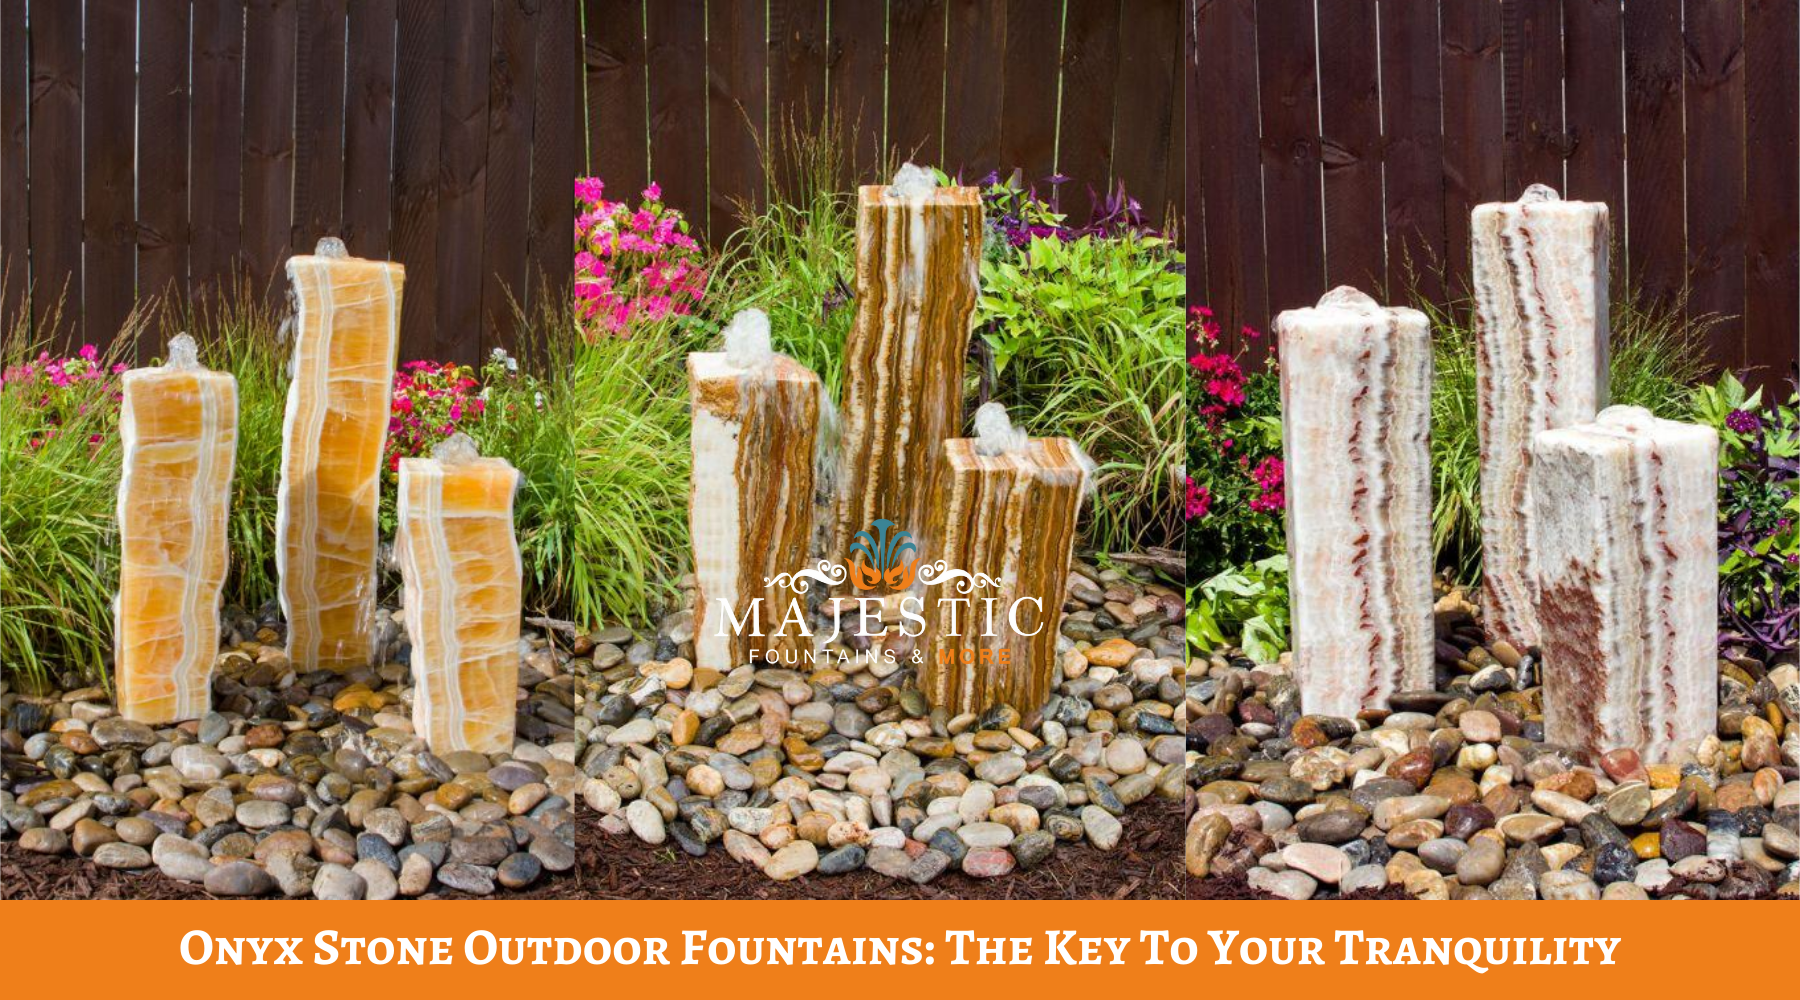 Onyx Stone Outdoor Fountains: The Key To Your Tranquility